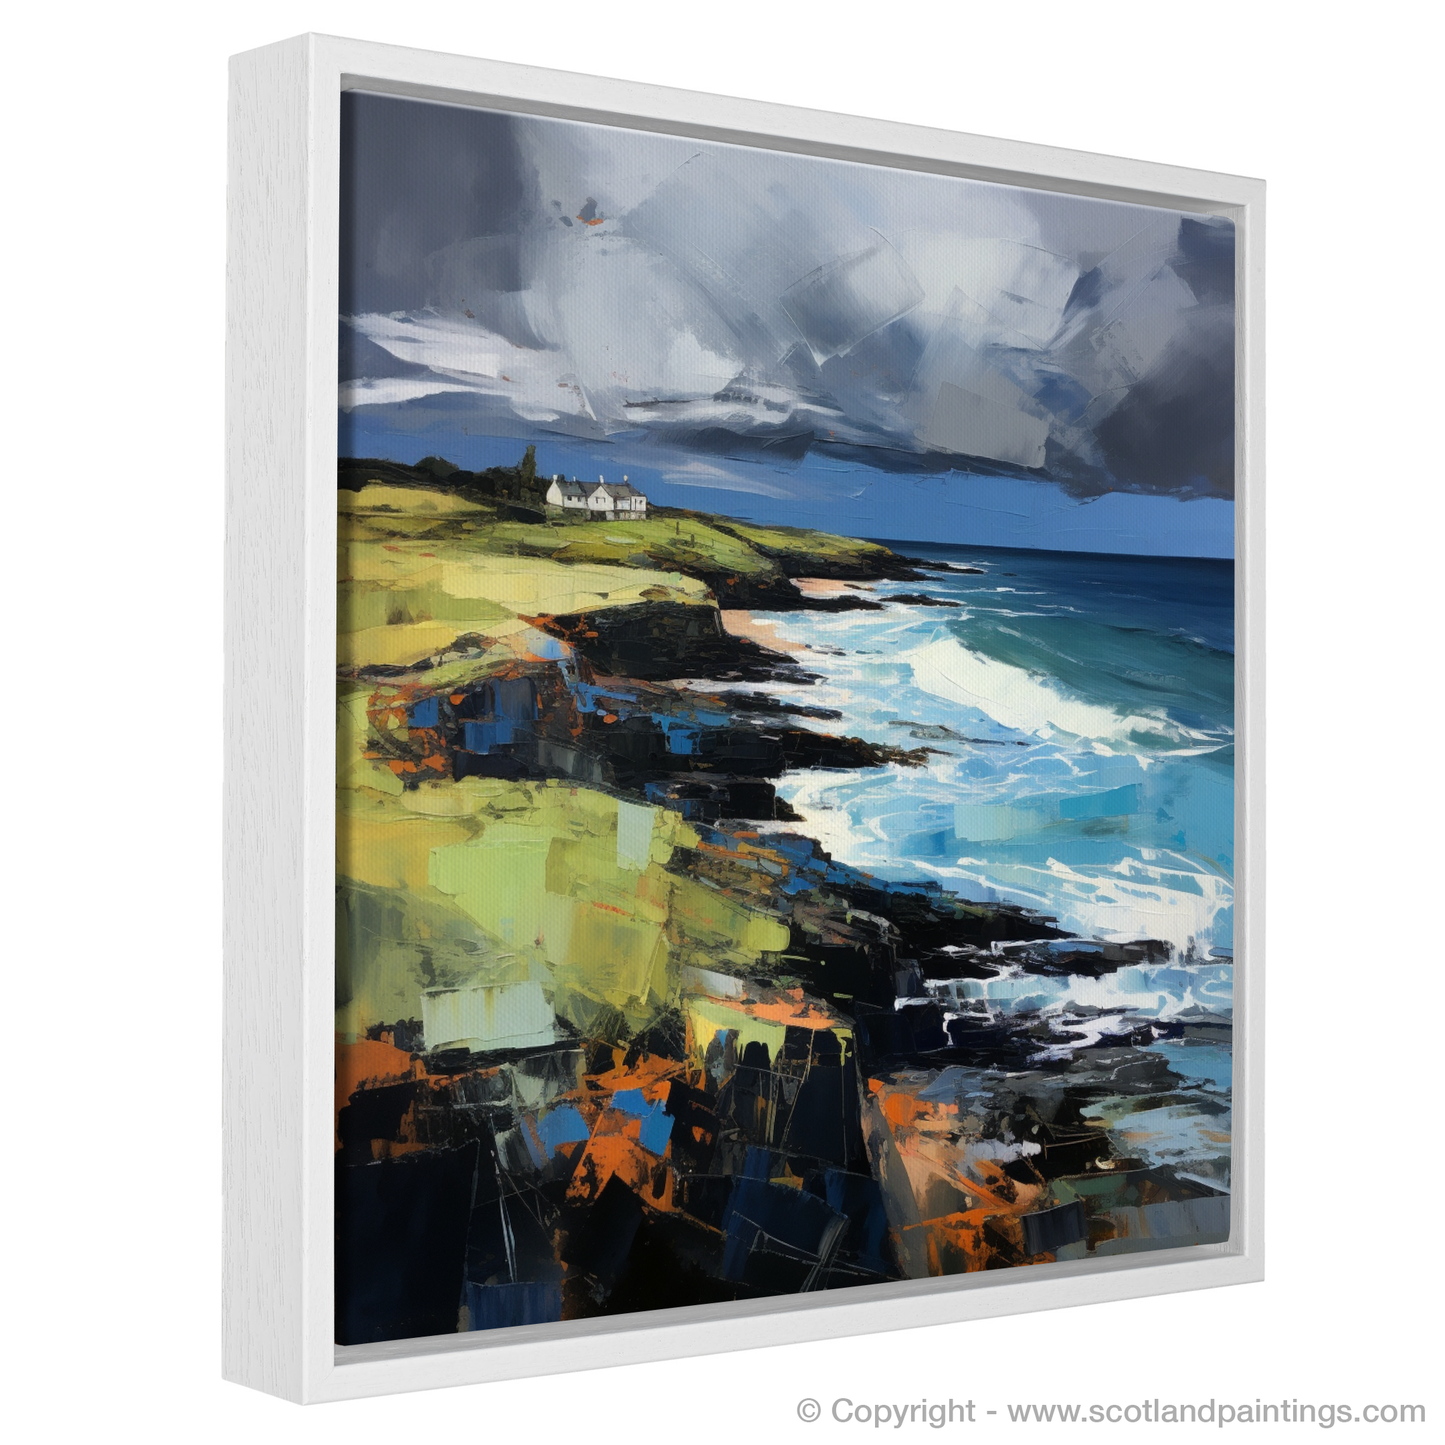 Painting and Art Print of Coldingham Bay with a stormy sky entitled "Storm's Embrace over Coldingham Bay".